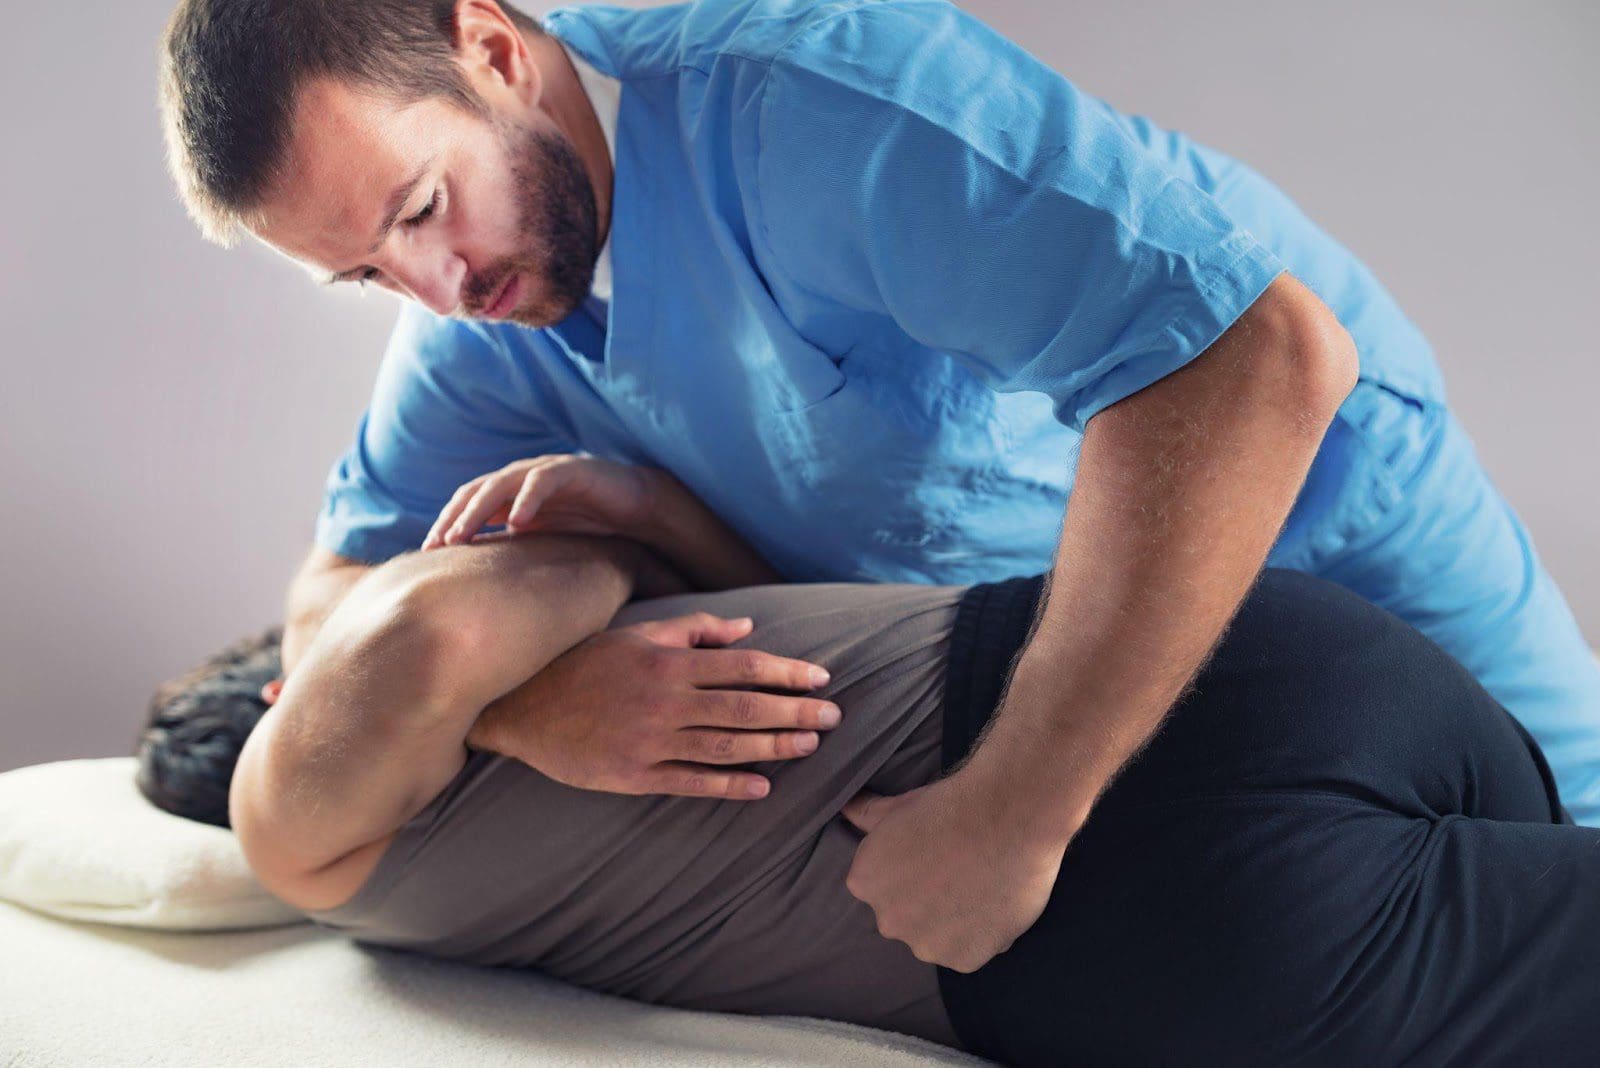 Chiropractor adjusting a young male patient's lower back.